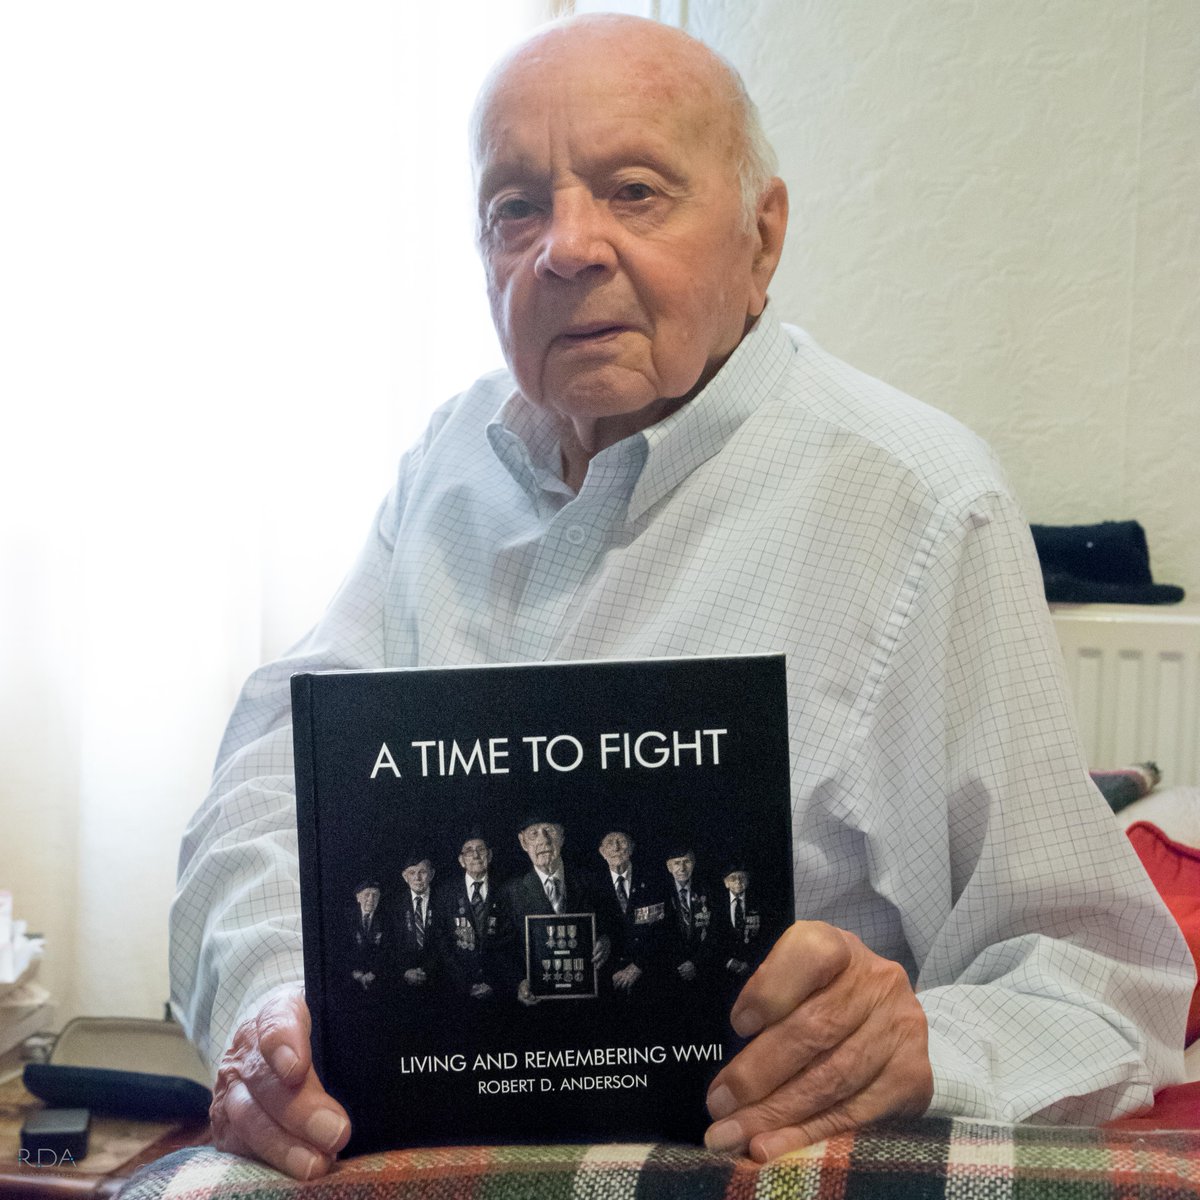 I had the pleasure of meeting up with Jeff Haward of the 51st Highland Division to drop off a few things from my project A TIME TO FIGHT - TODAY he turned 100  @51HD @MilHistMag @MilitaryHB  @HistoryExtra @UnicornPubGroup #atimetofight @DDayRevisited @WW2Talk @WWIIhistorynet